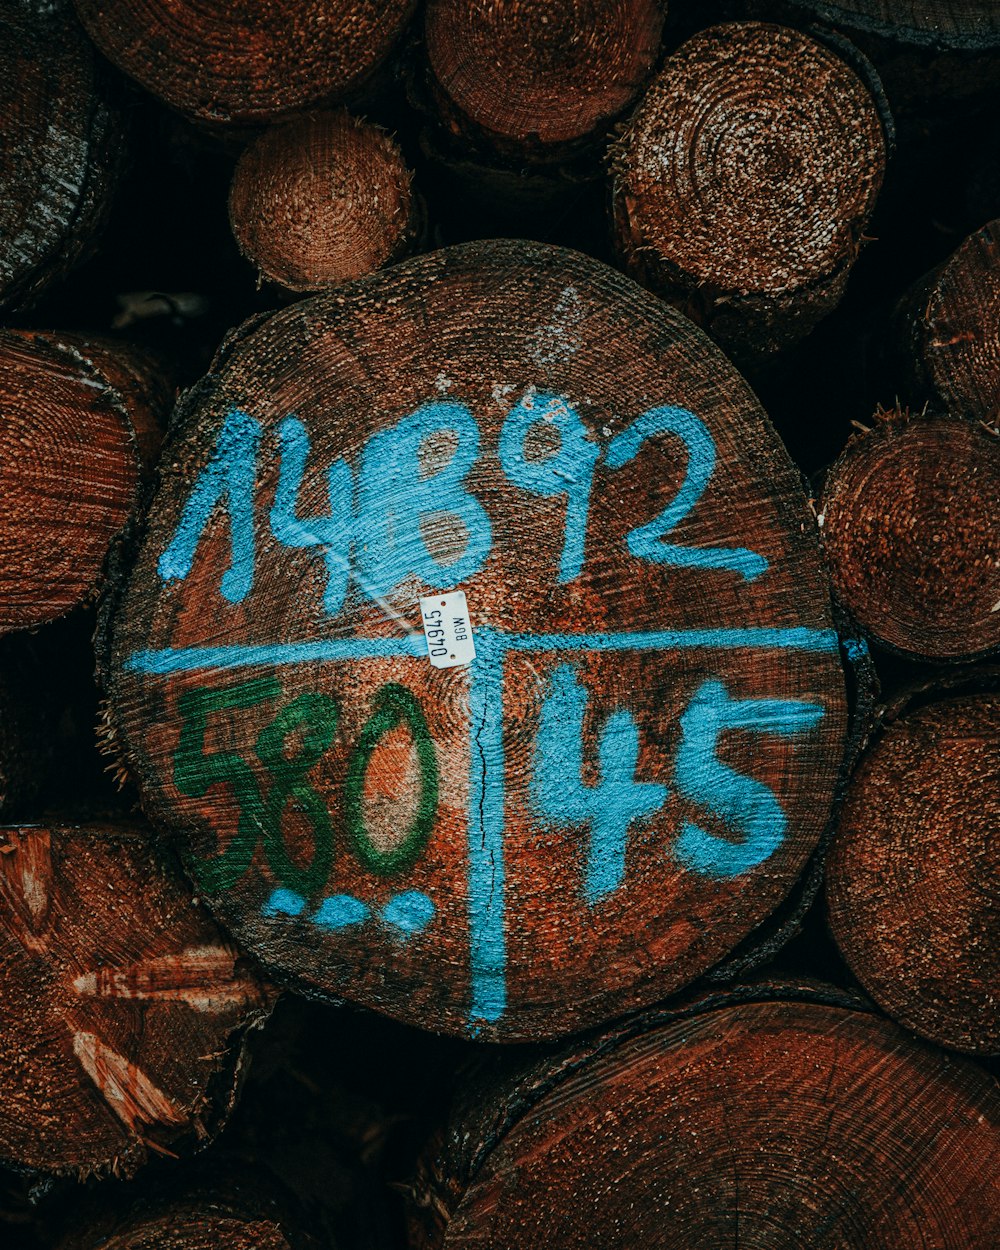 a close up of a pile of wood with graffiti on it